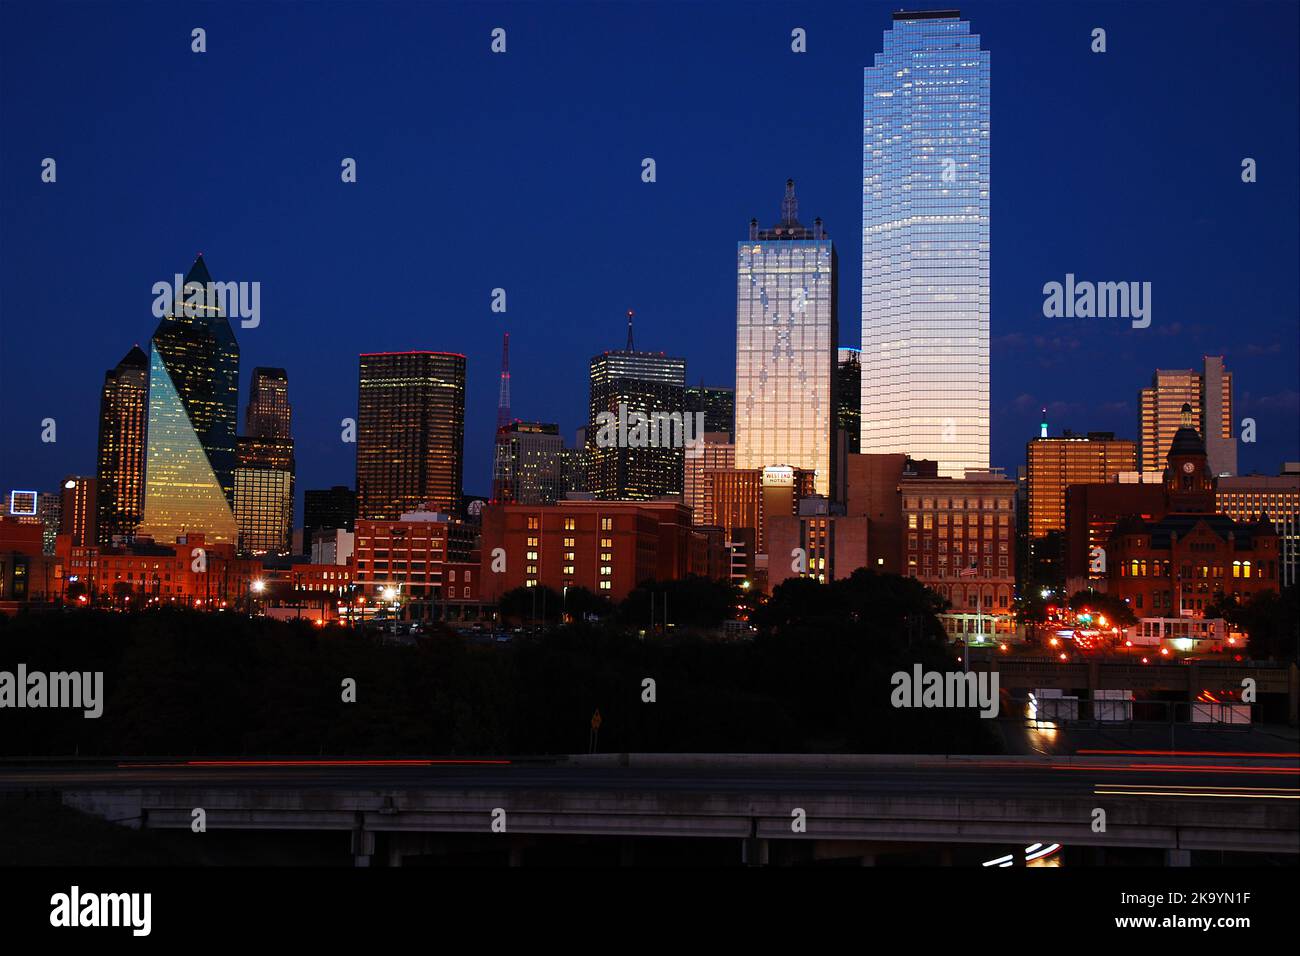 The sunset sky is reflected in the glass and windows of the Dallas Texas skyline at night Stock Photo